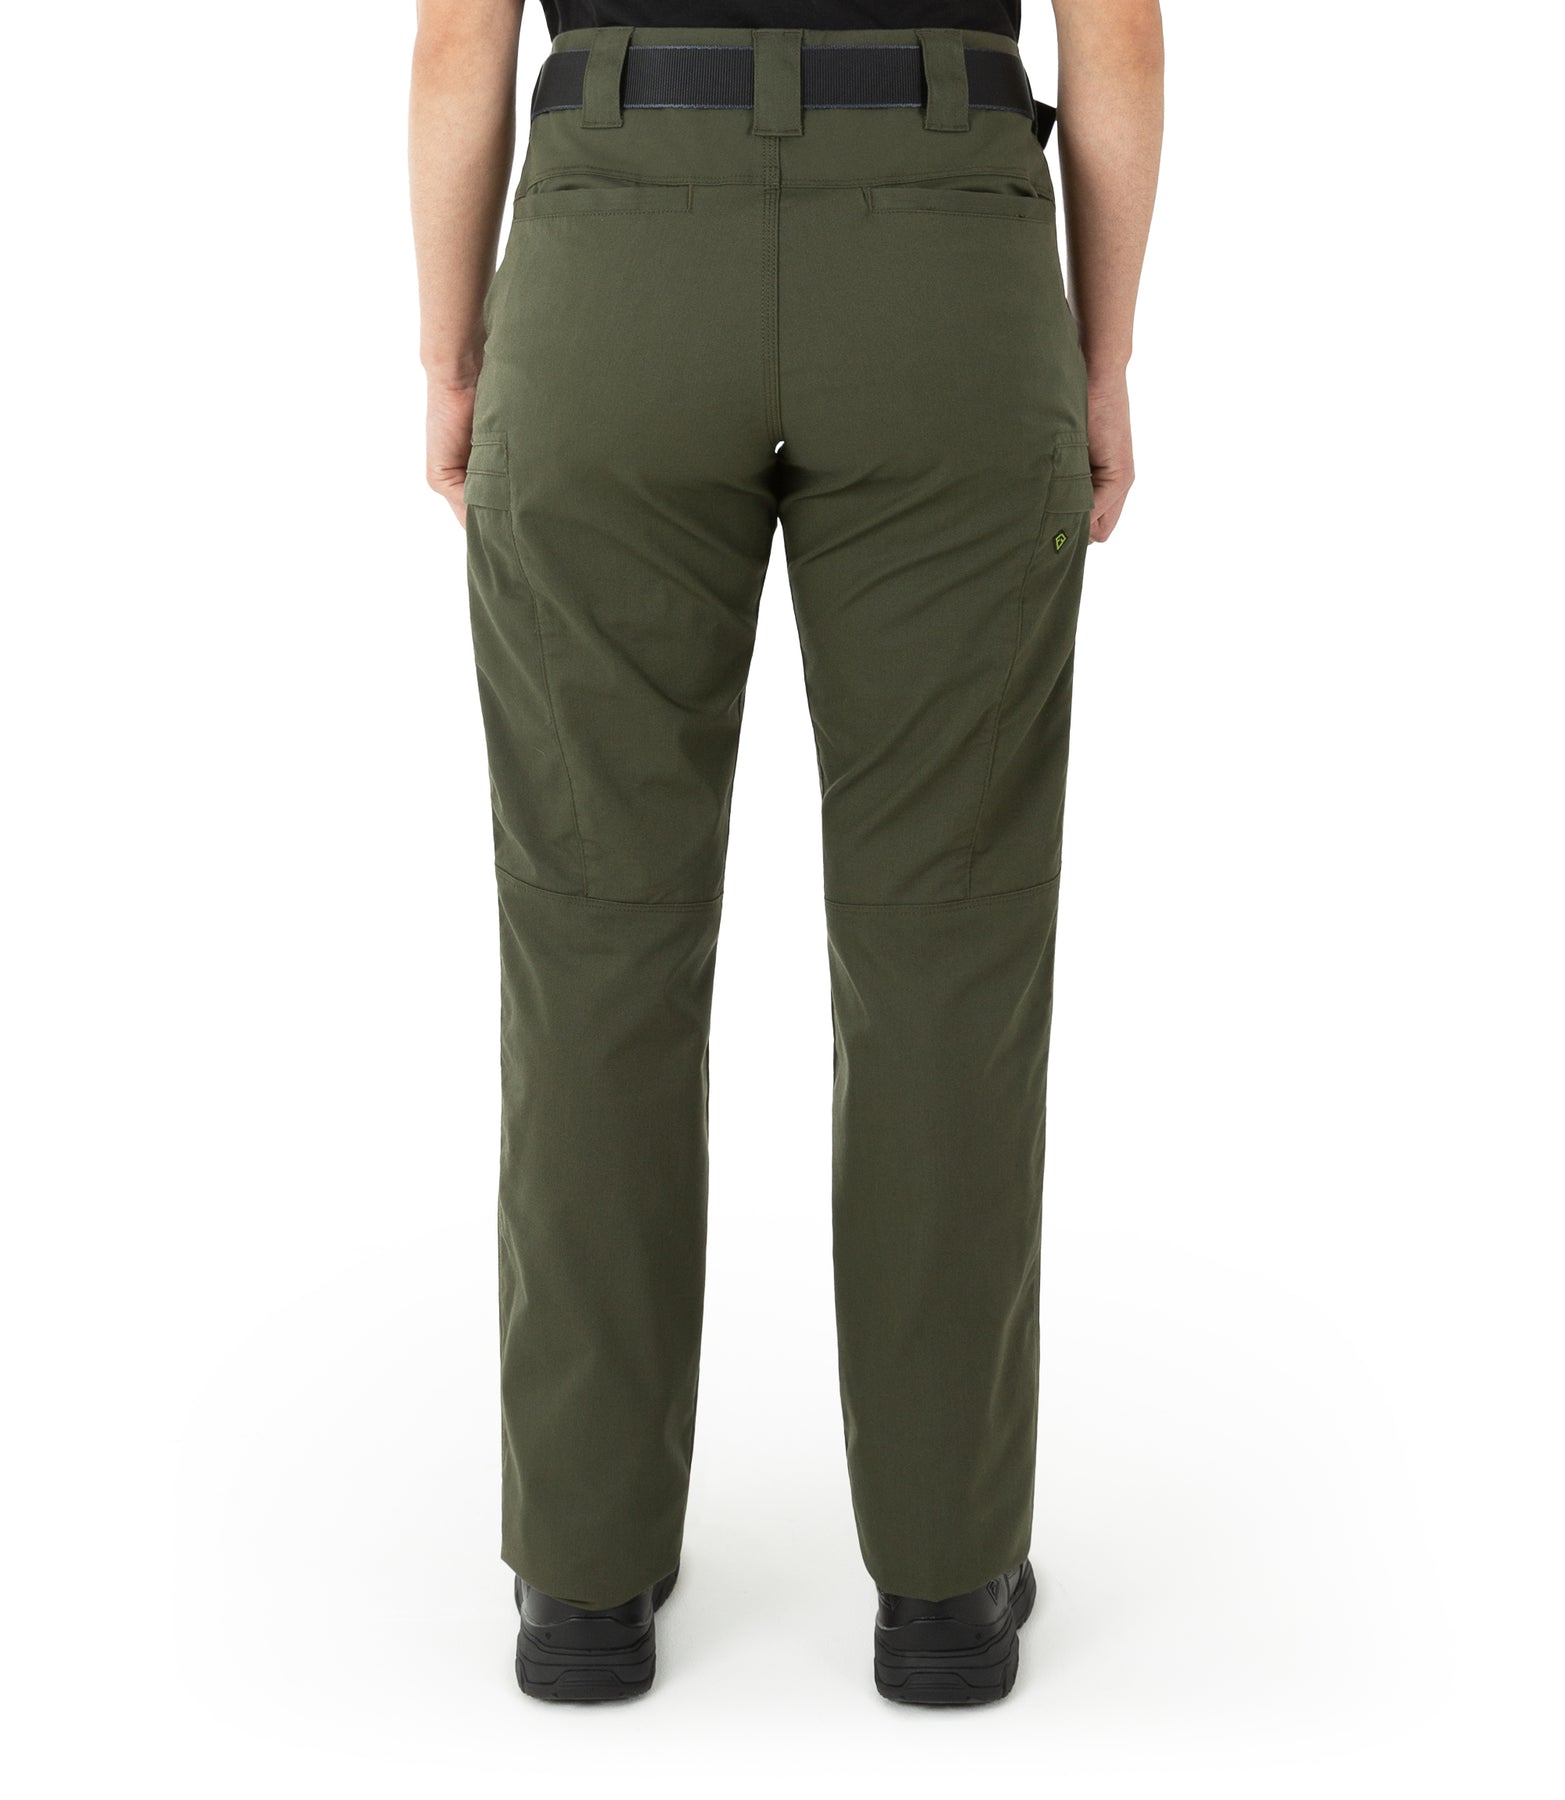 Women's A2 Pant / OD Green – First Tactical